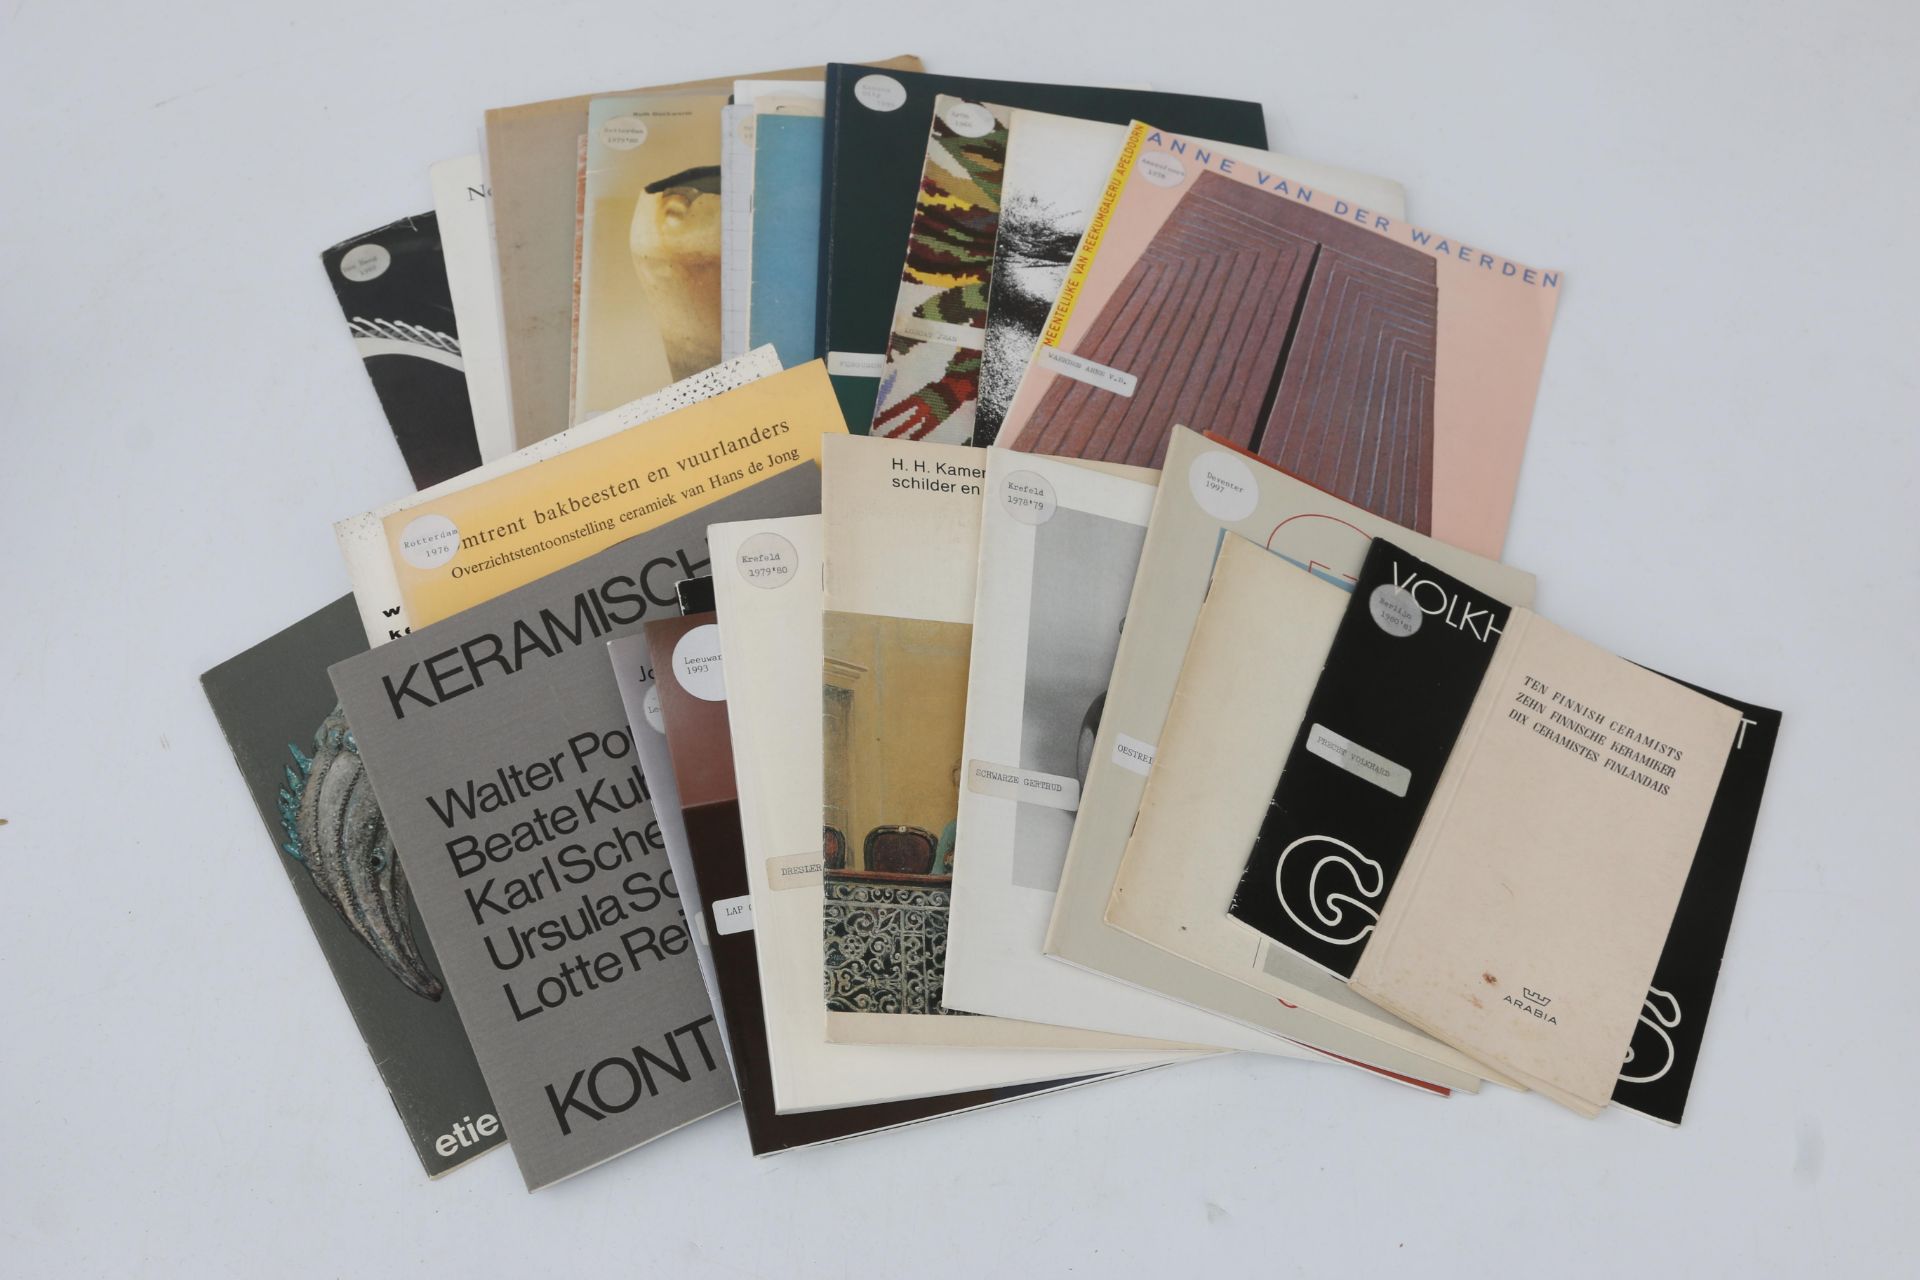 Various catalogues on 20th century applied arts, i.e. ceramists like Helly Oestreicher, Jan van der